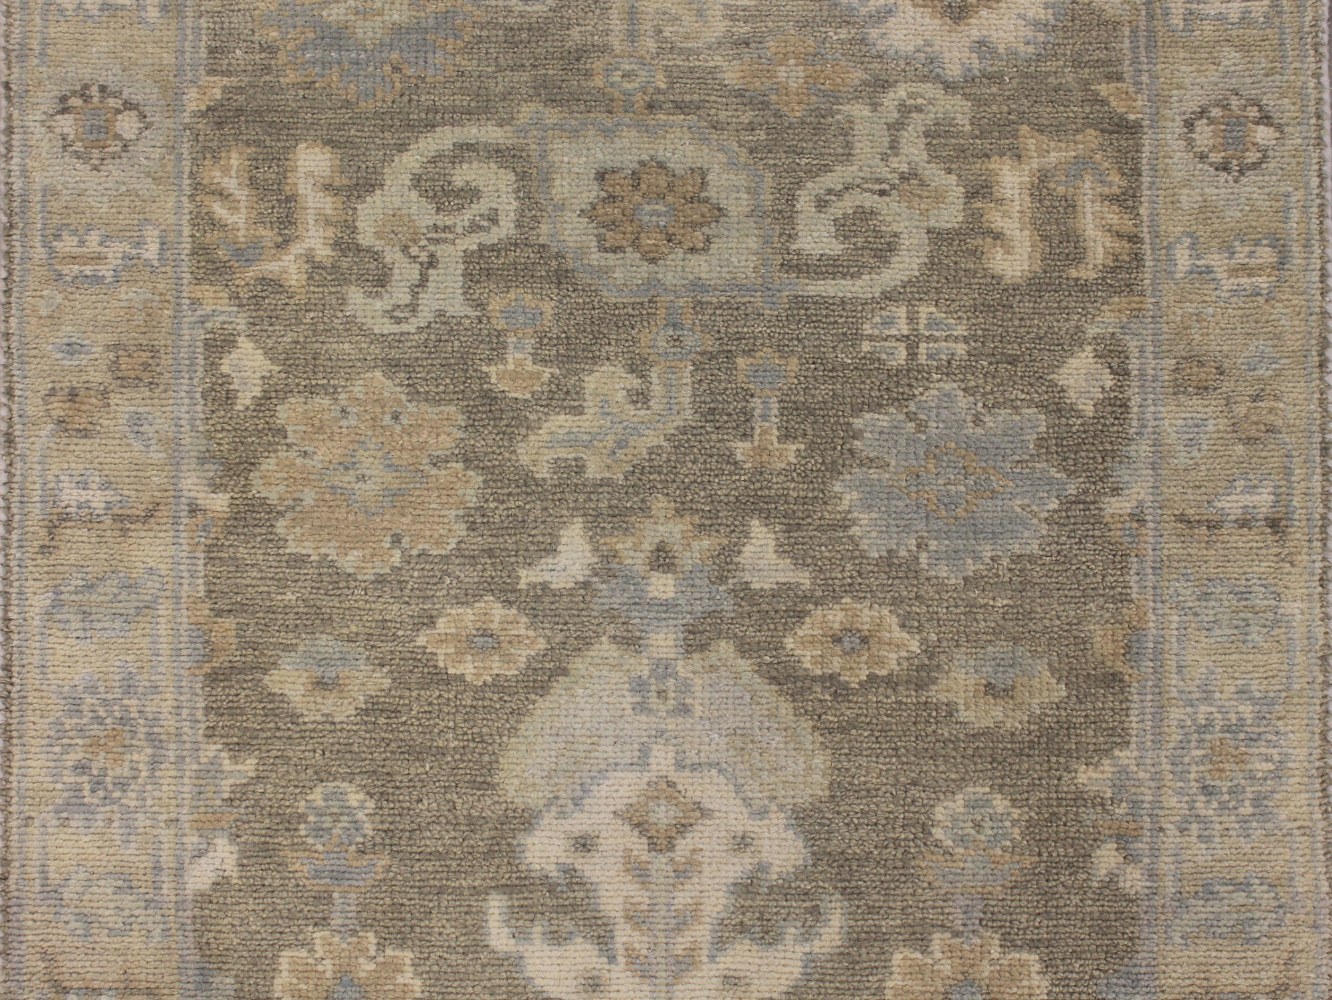 10 ft. Runner Oushak Hand Knotted Wool Area Rug - MR028076